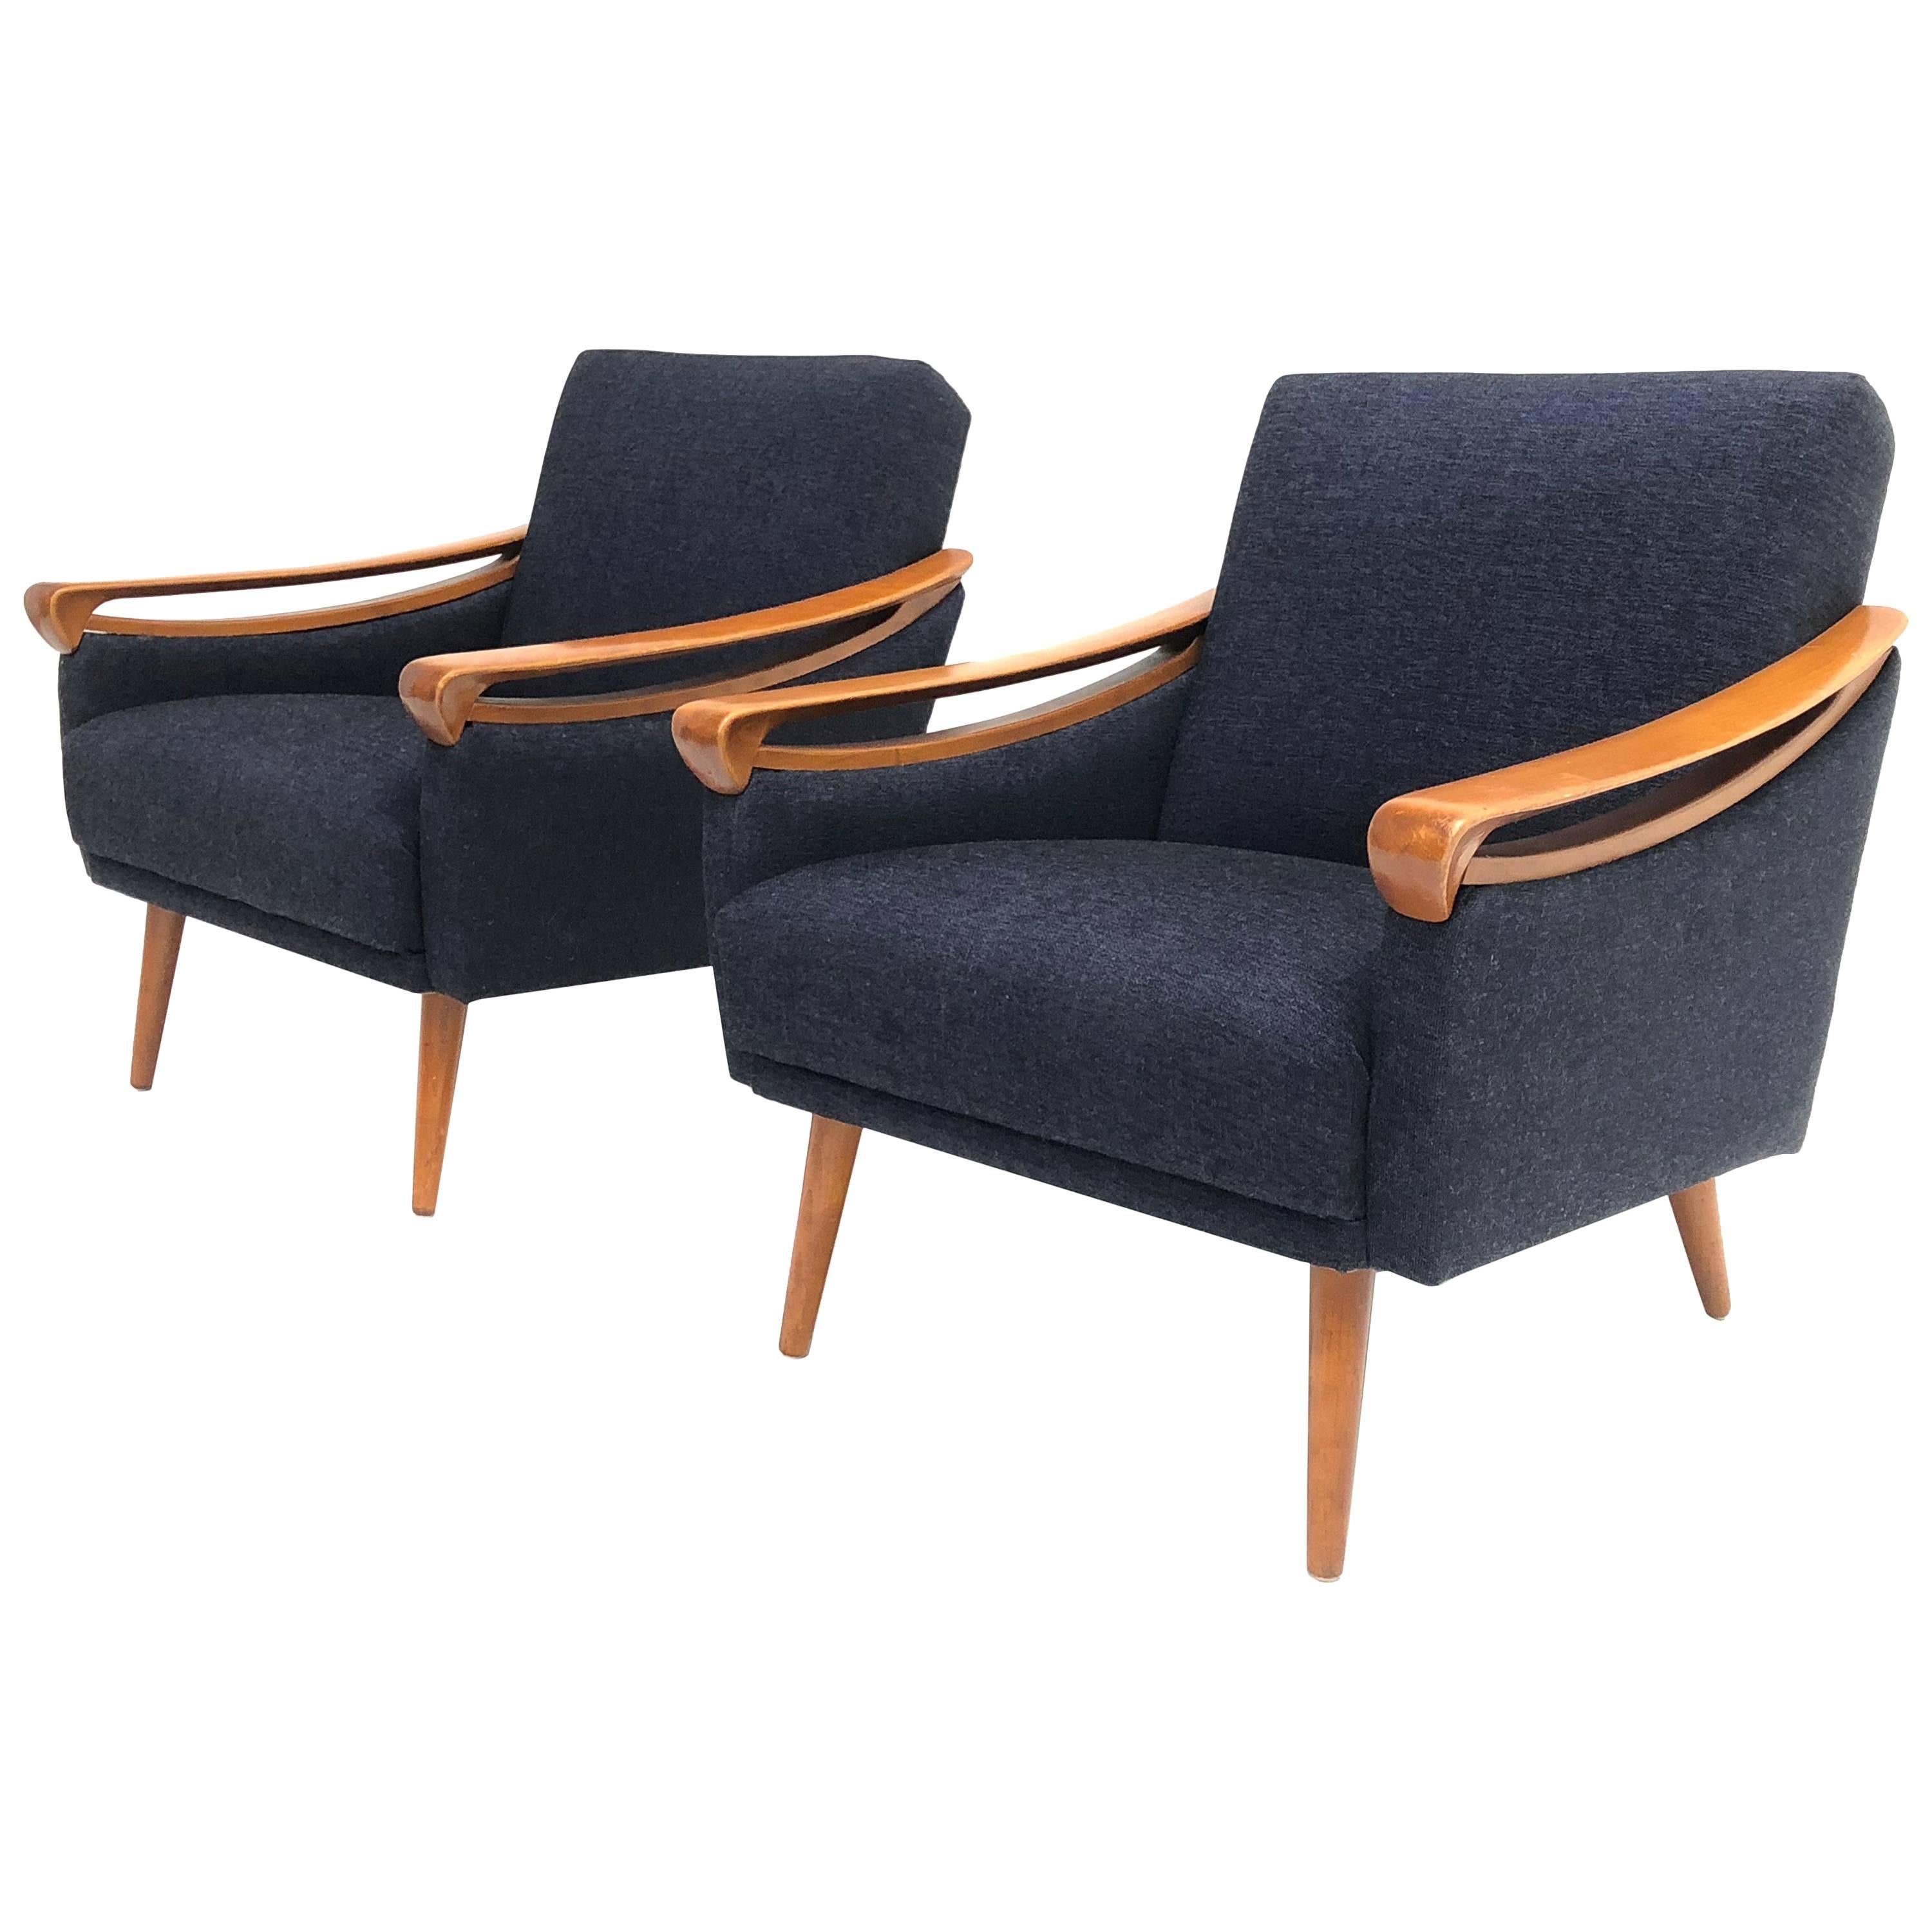 Pair of New Upholstered Mid-Century Modern Armchairs by Lifa, West Germany, 1963